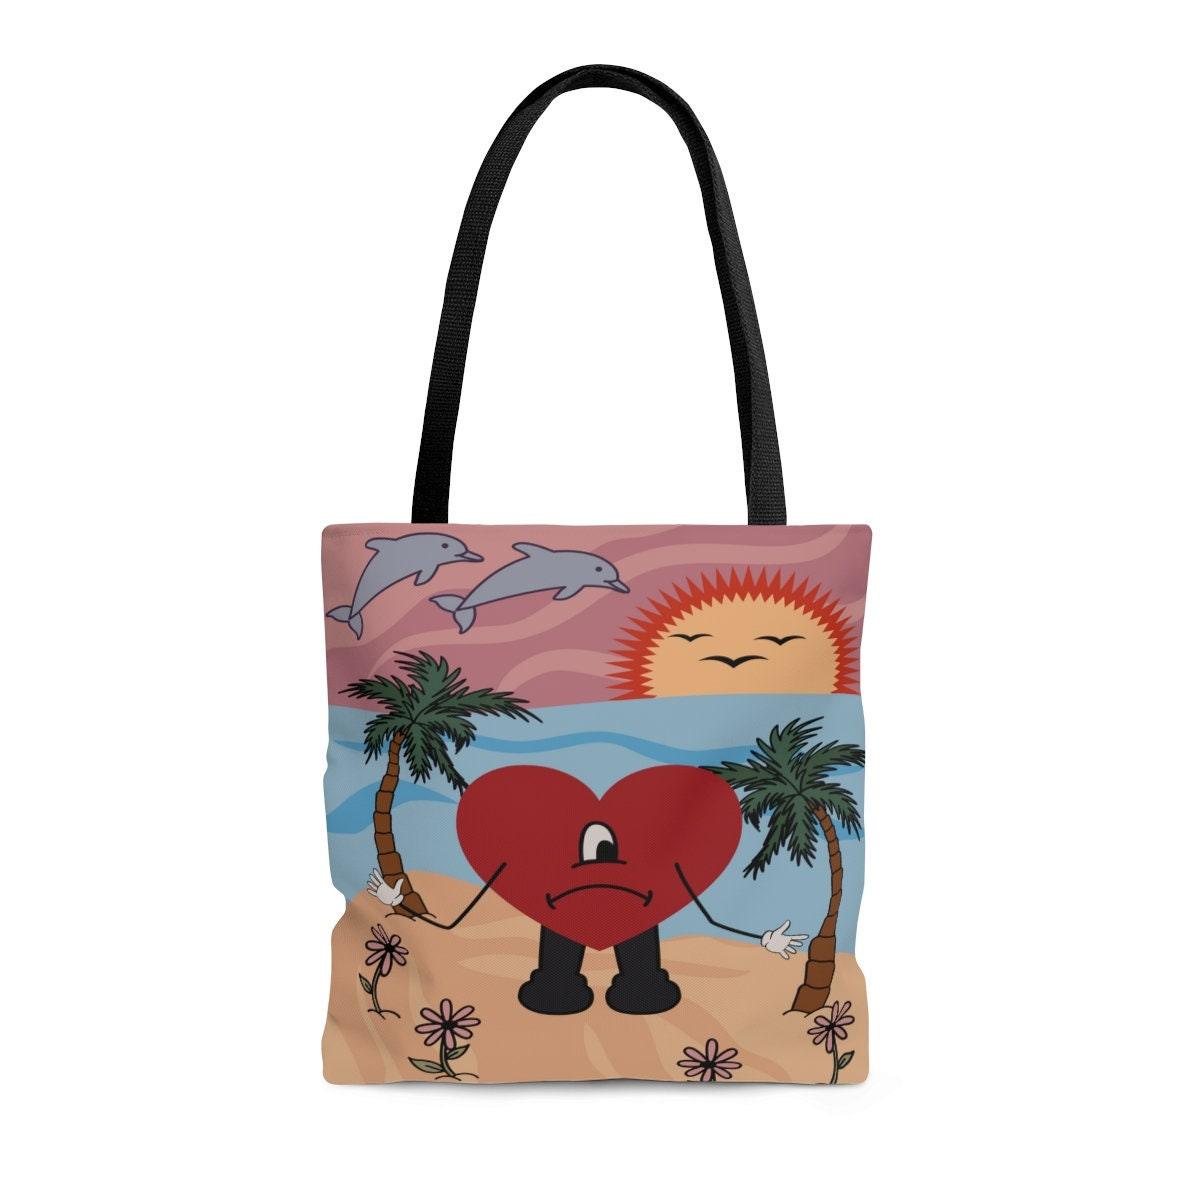 Baby Benito Indie Artist Tote Bag - TheCoolRuler